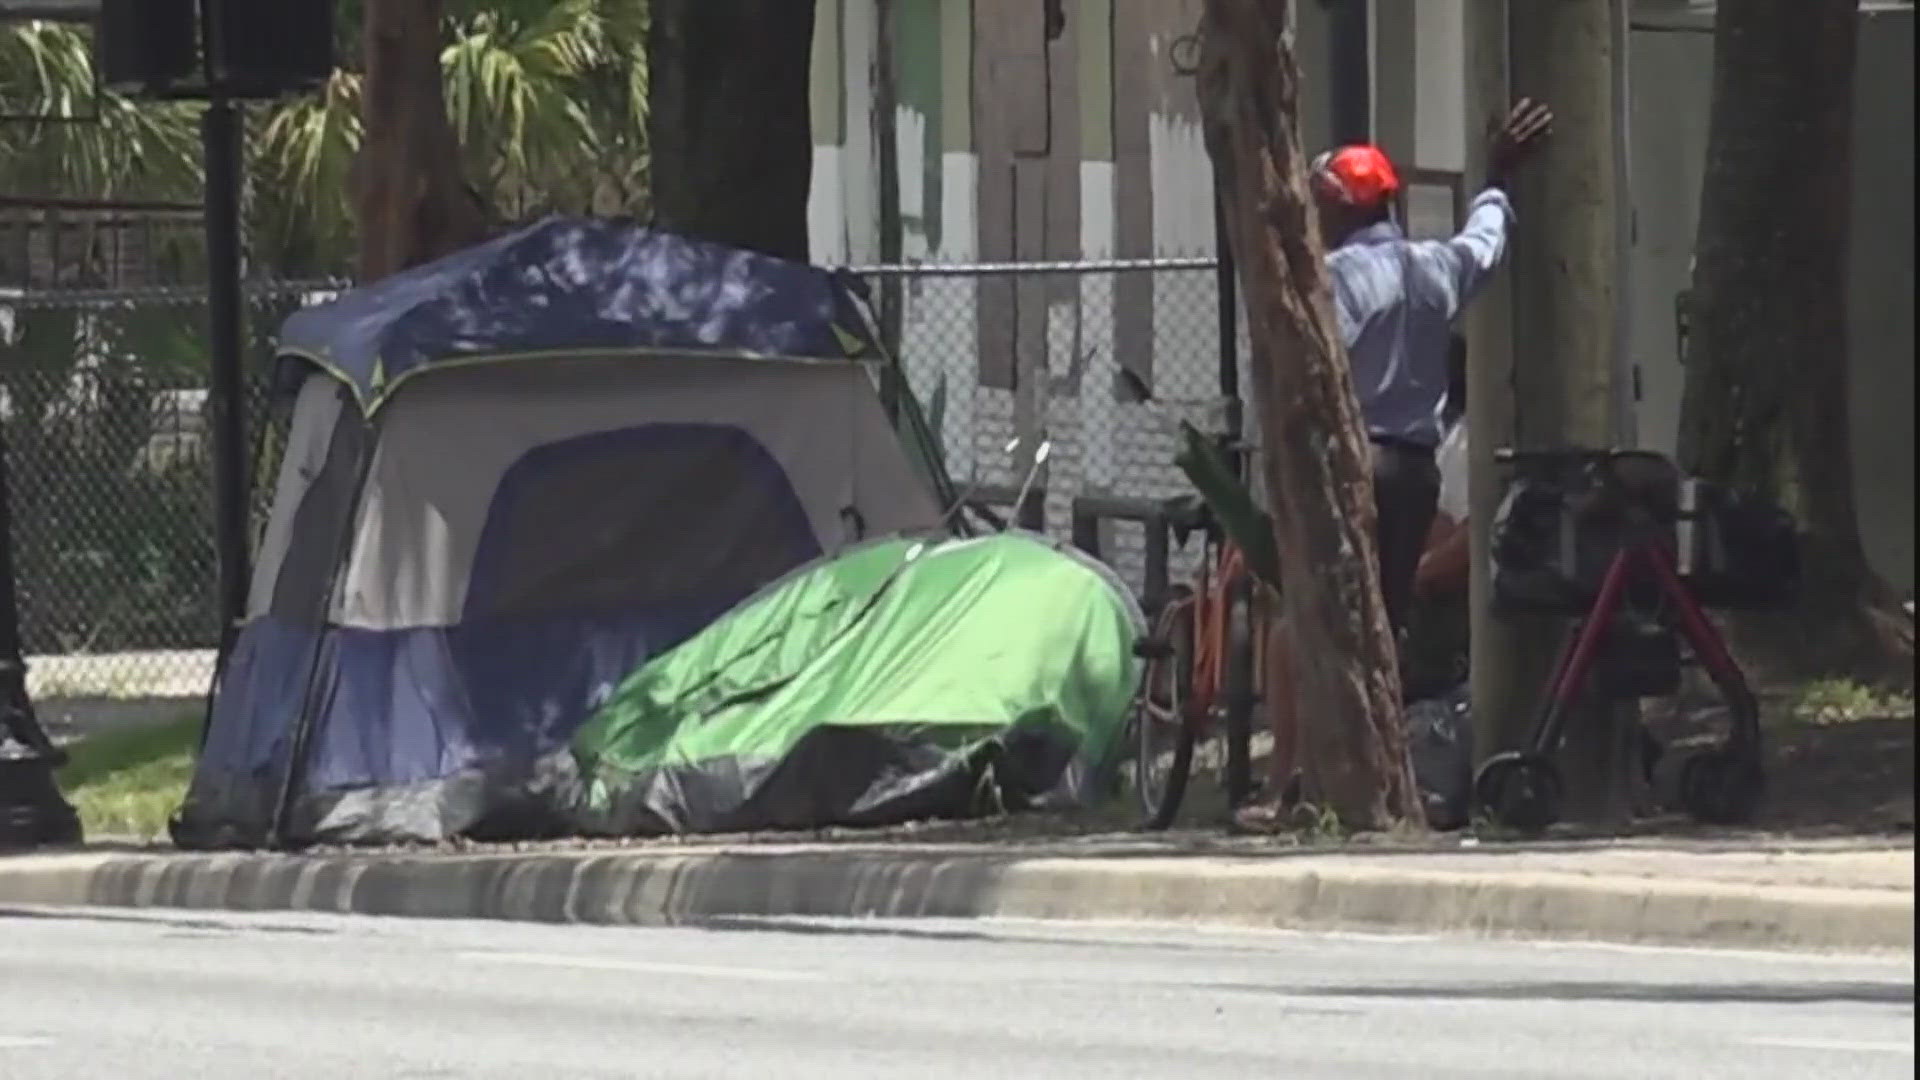 Starting Jan. 1, 2025, citizens will be allowed to sue municipalities if they feel the public sleeping and camping ban is not being enforced.